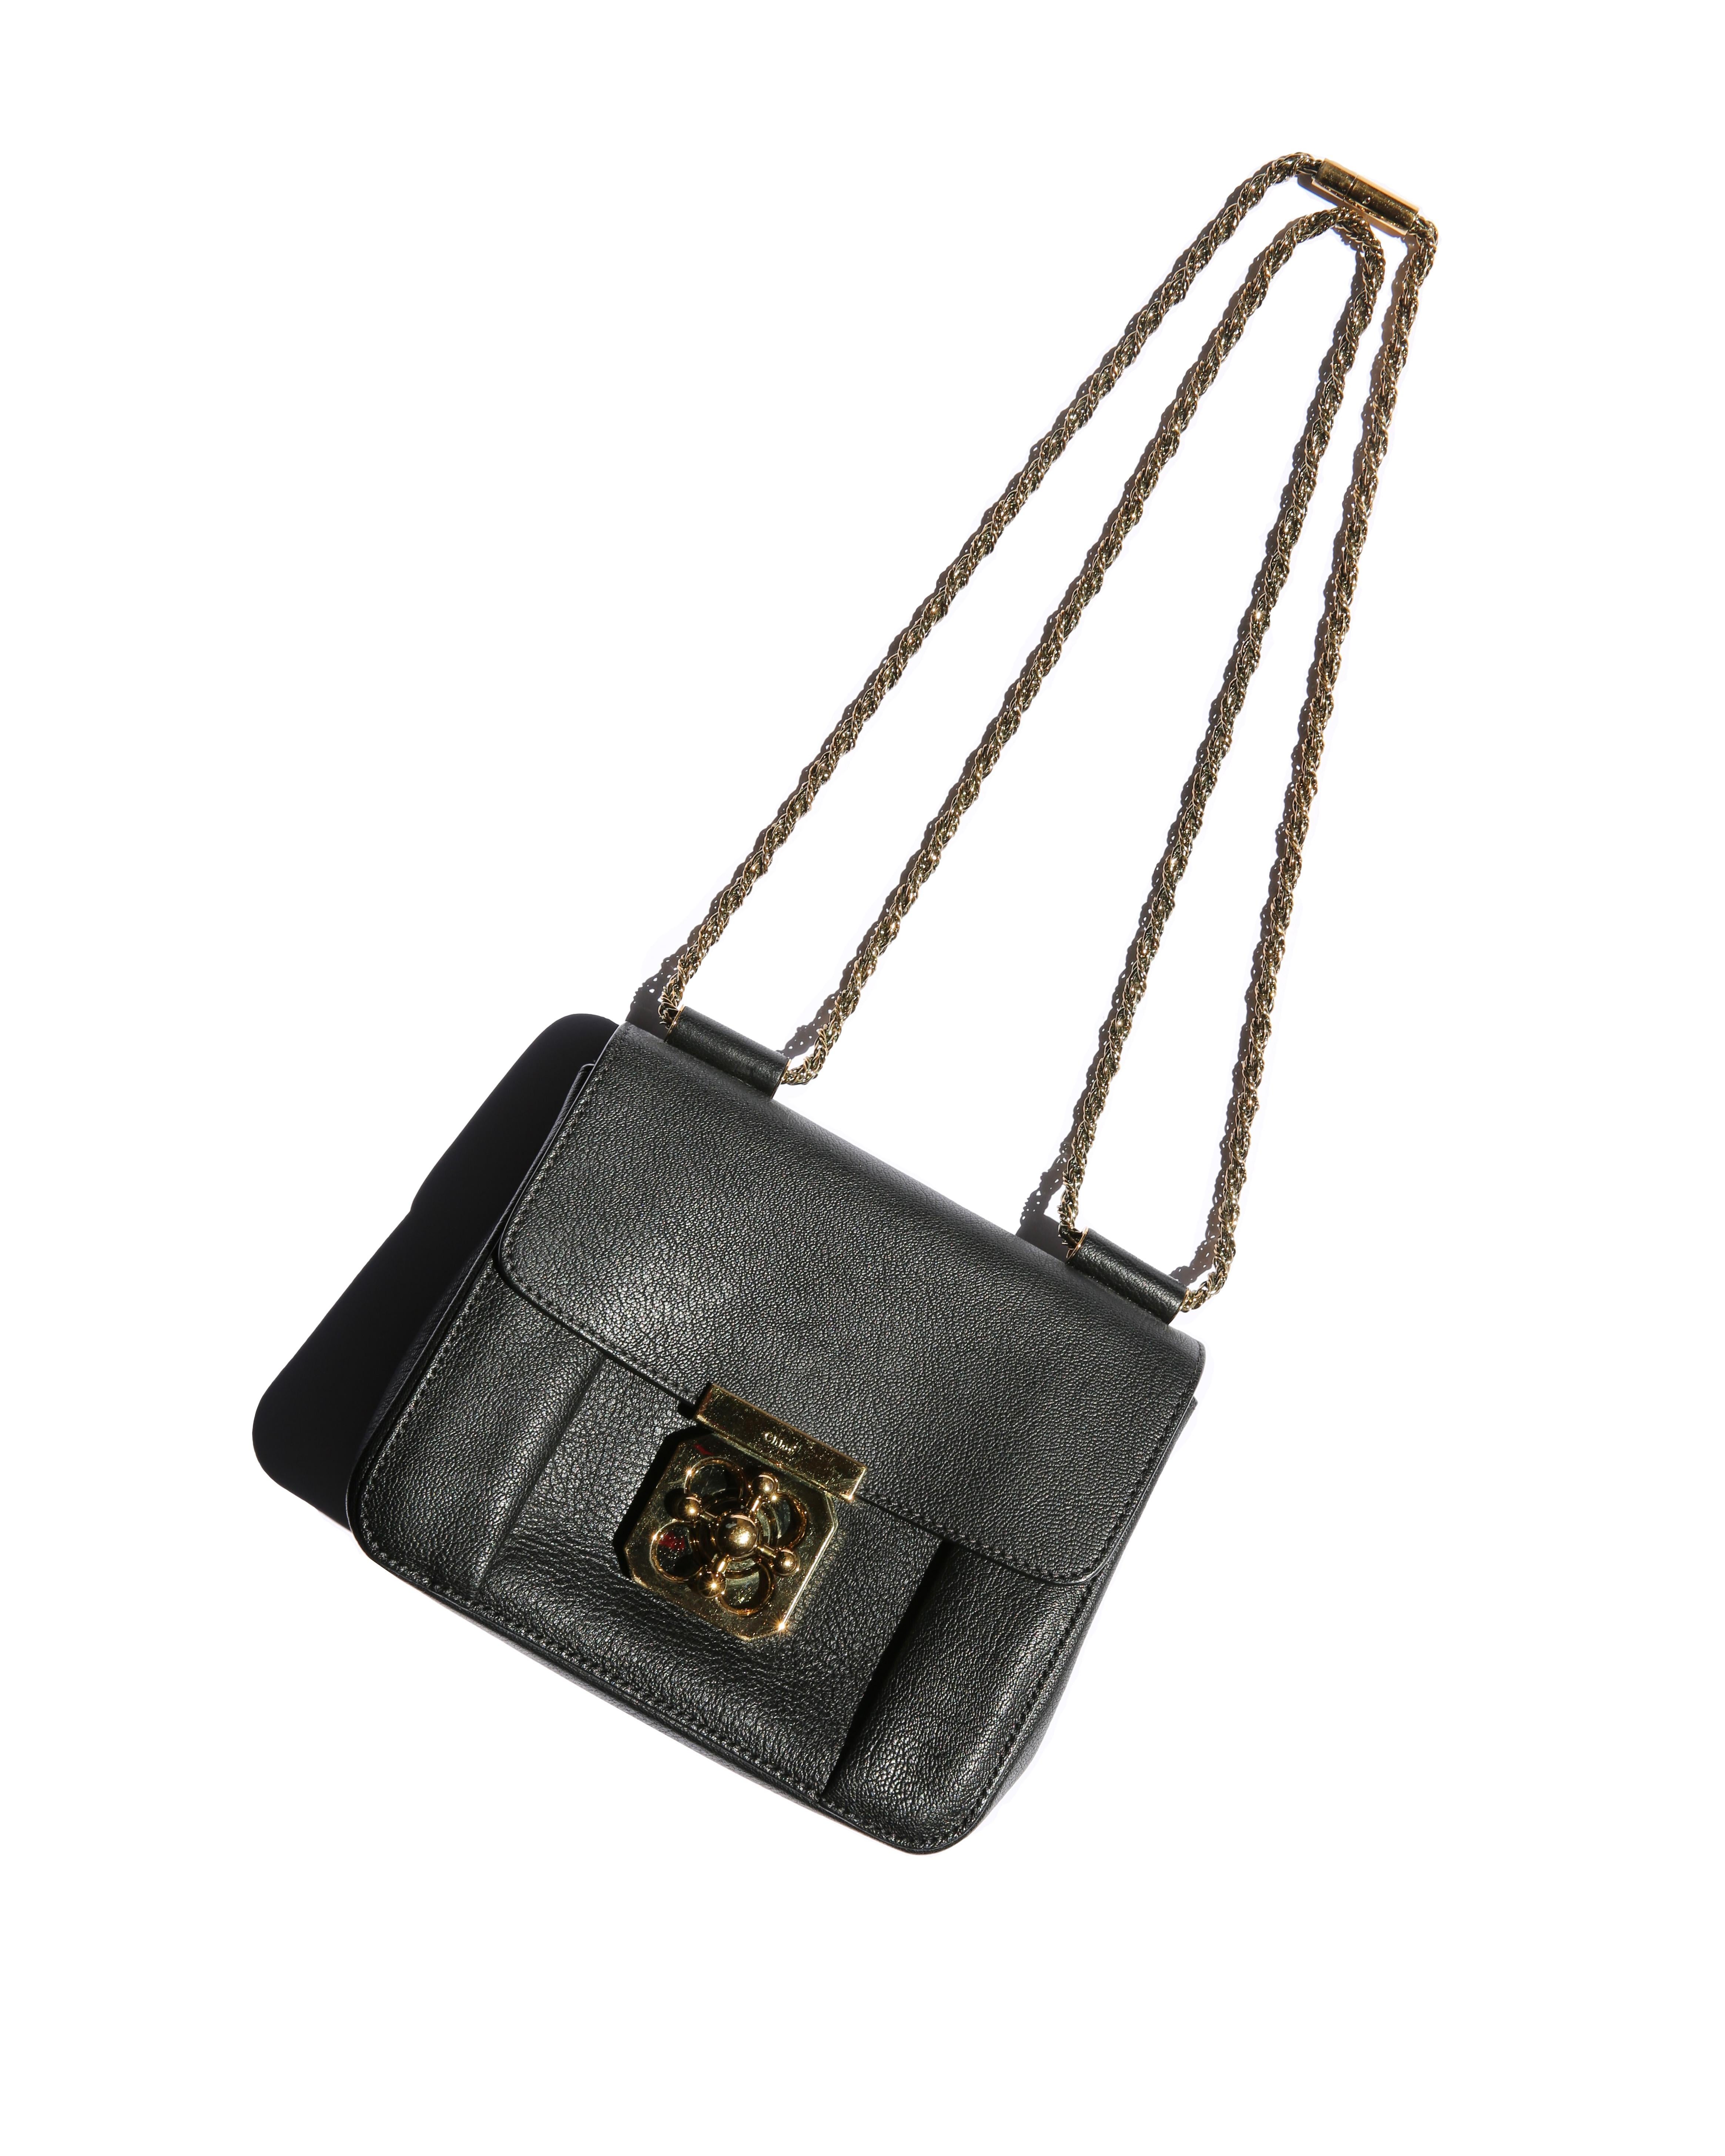 Chloe Elise black small gold chain grained leather shoulder bag clutch For Sale 2